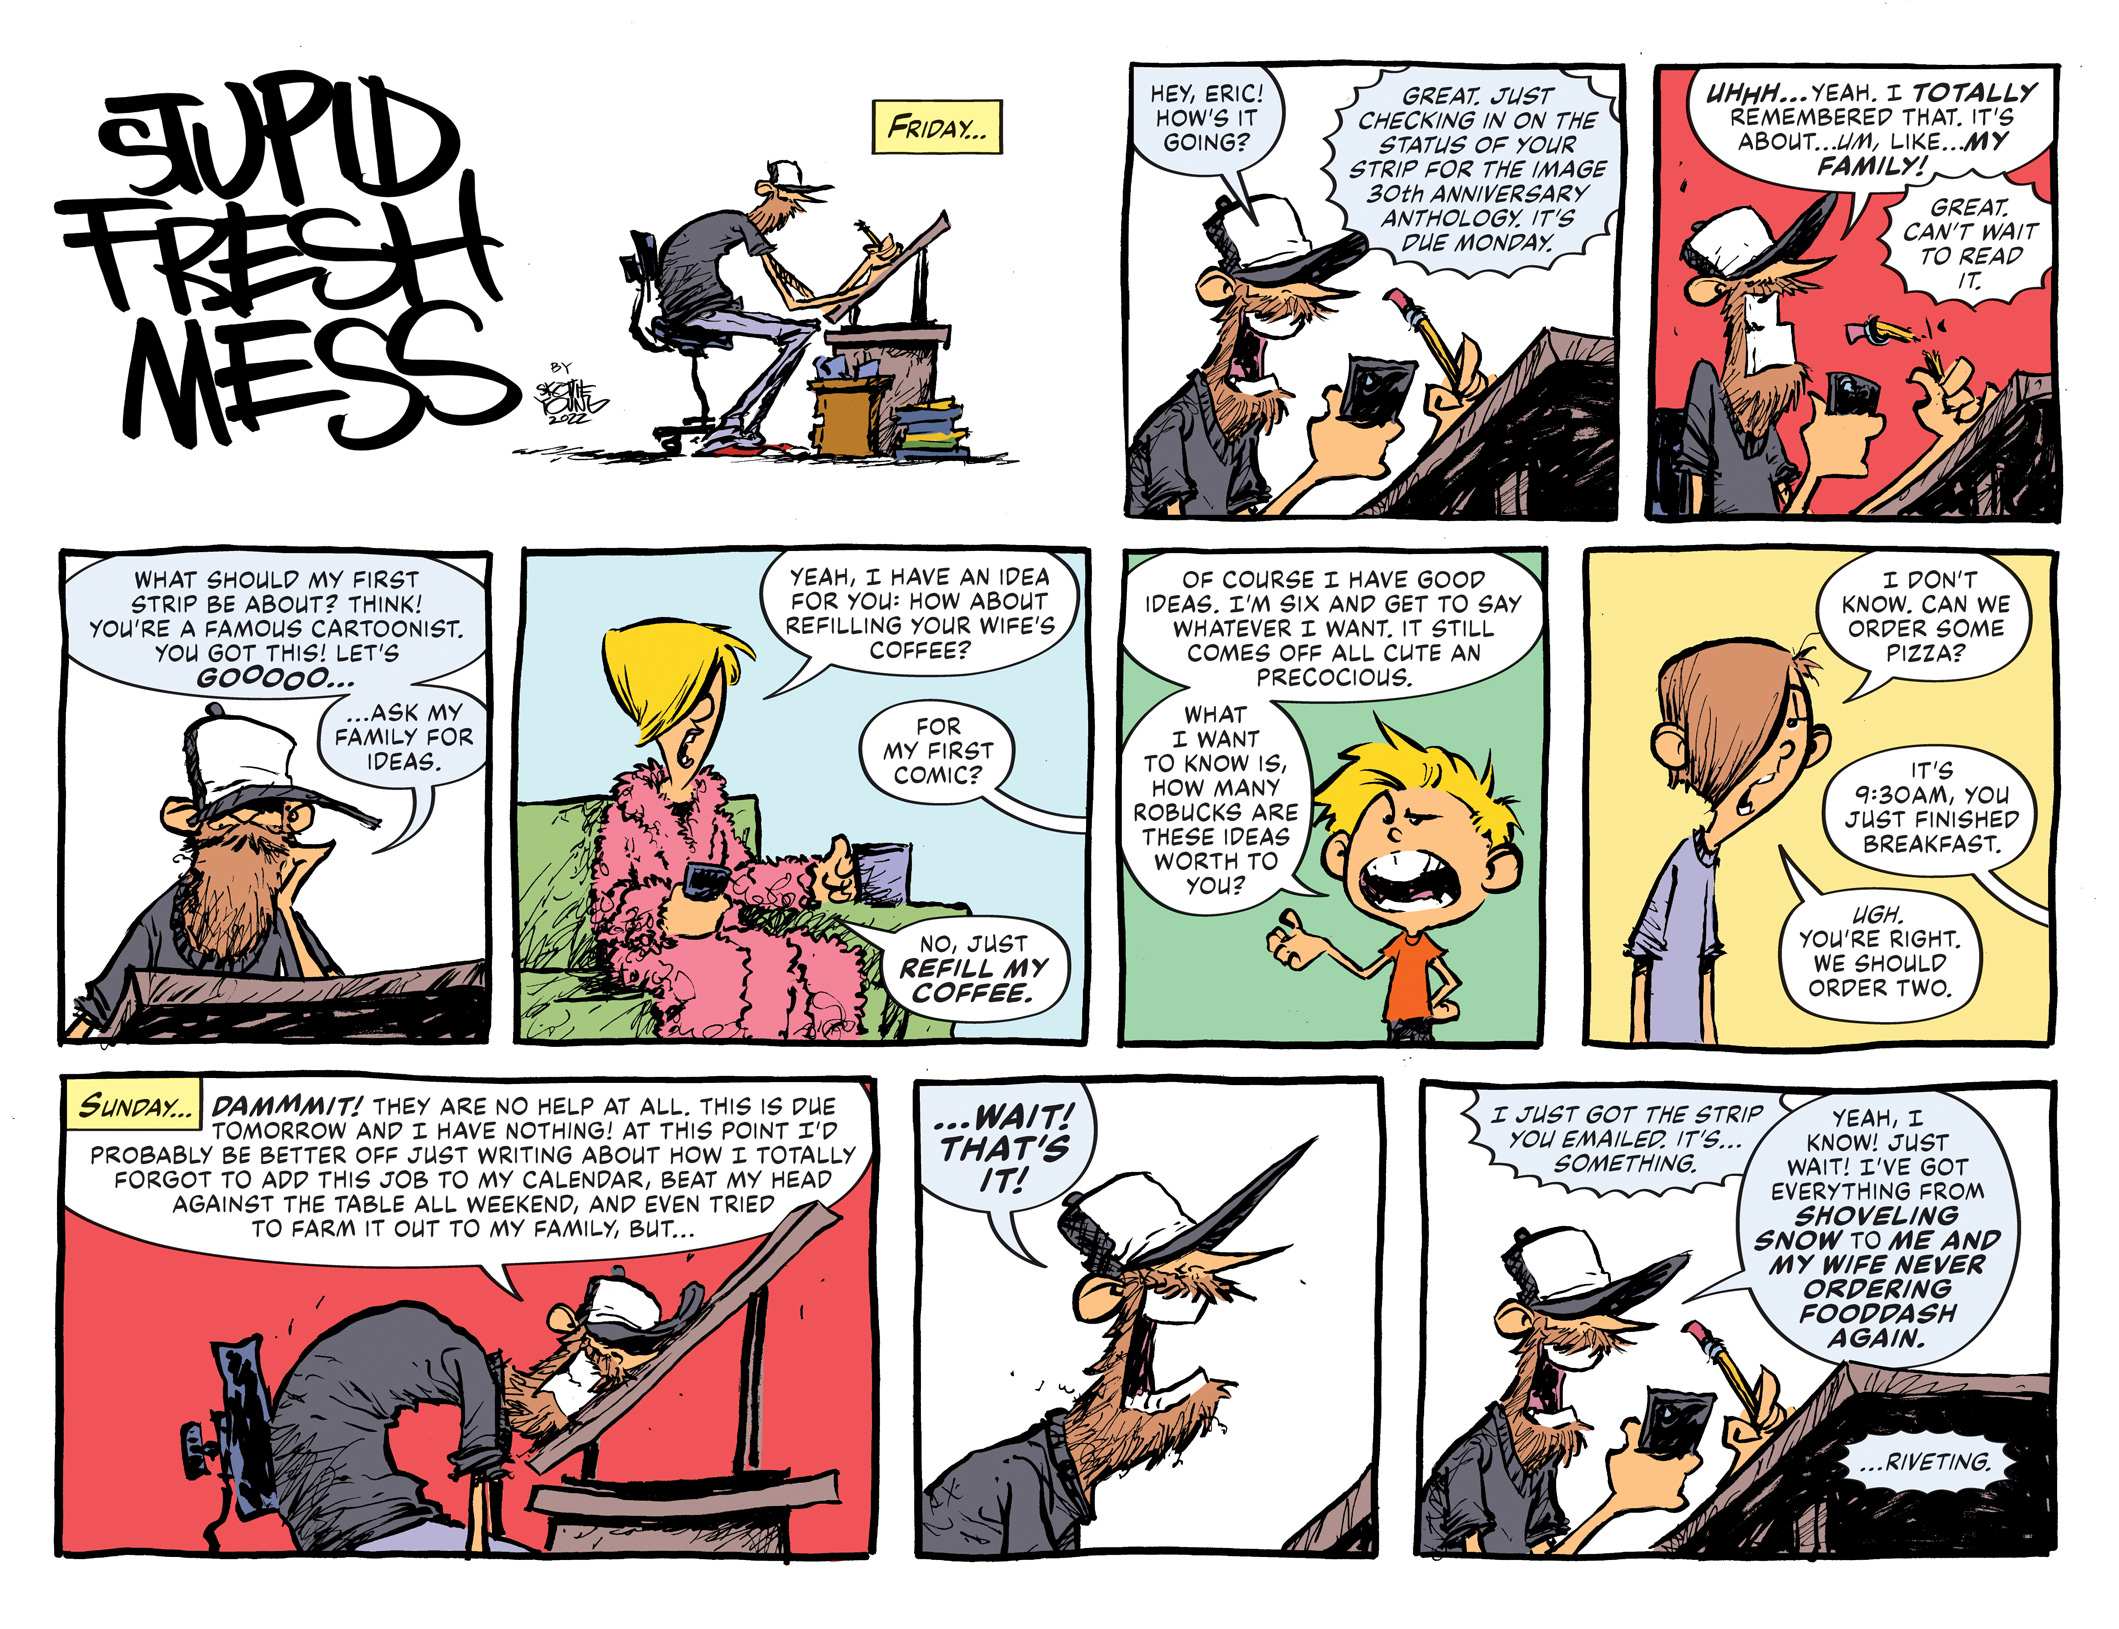 Stupid Fresh Mess...The Comic Strip - by Skottie Young